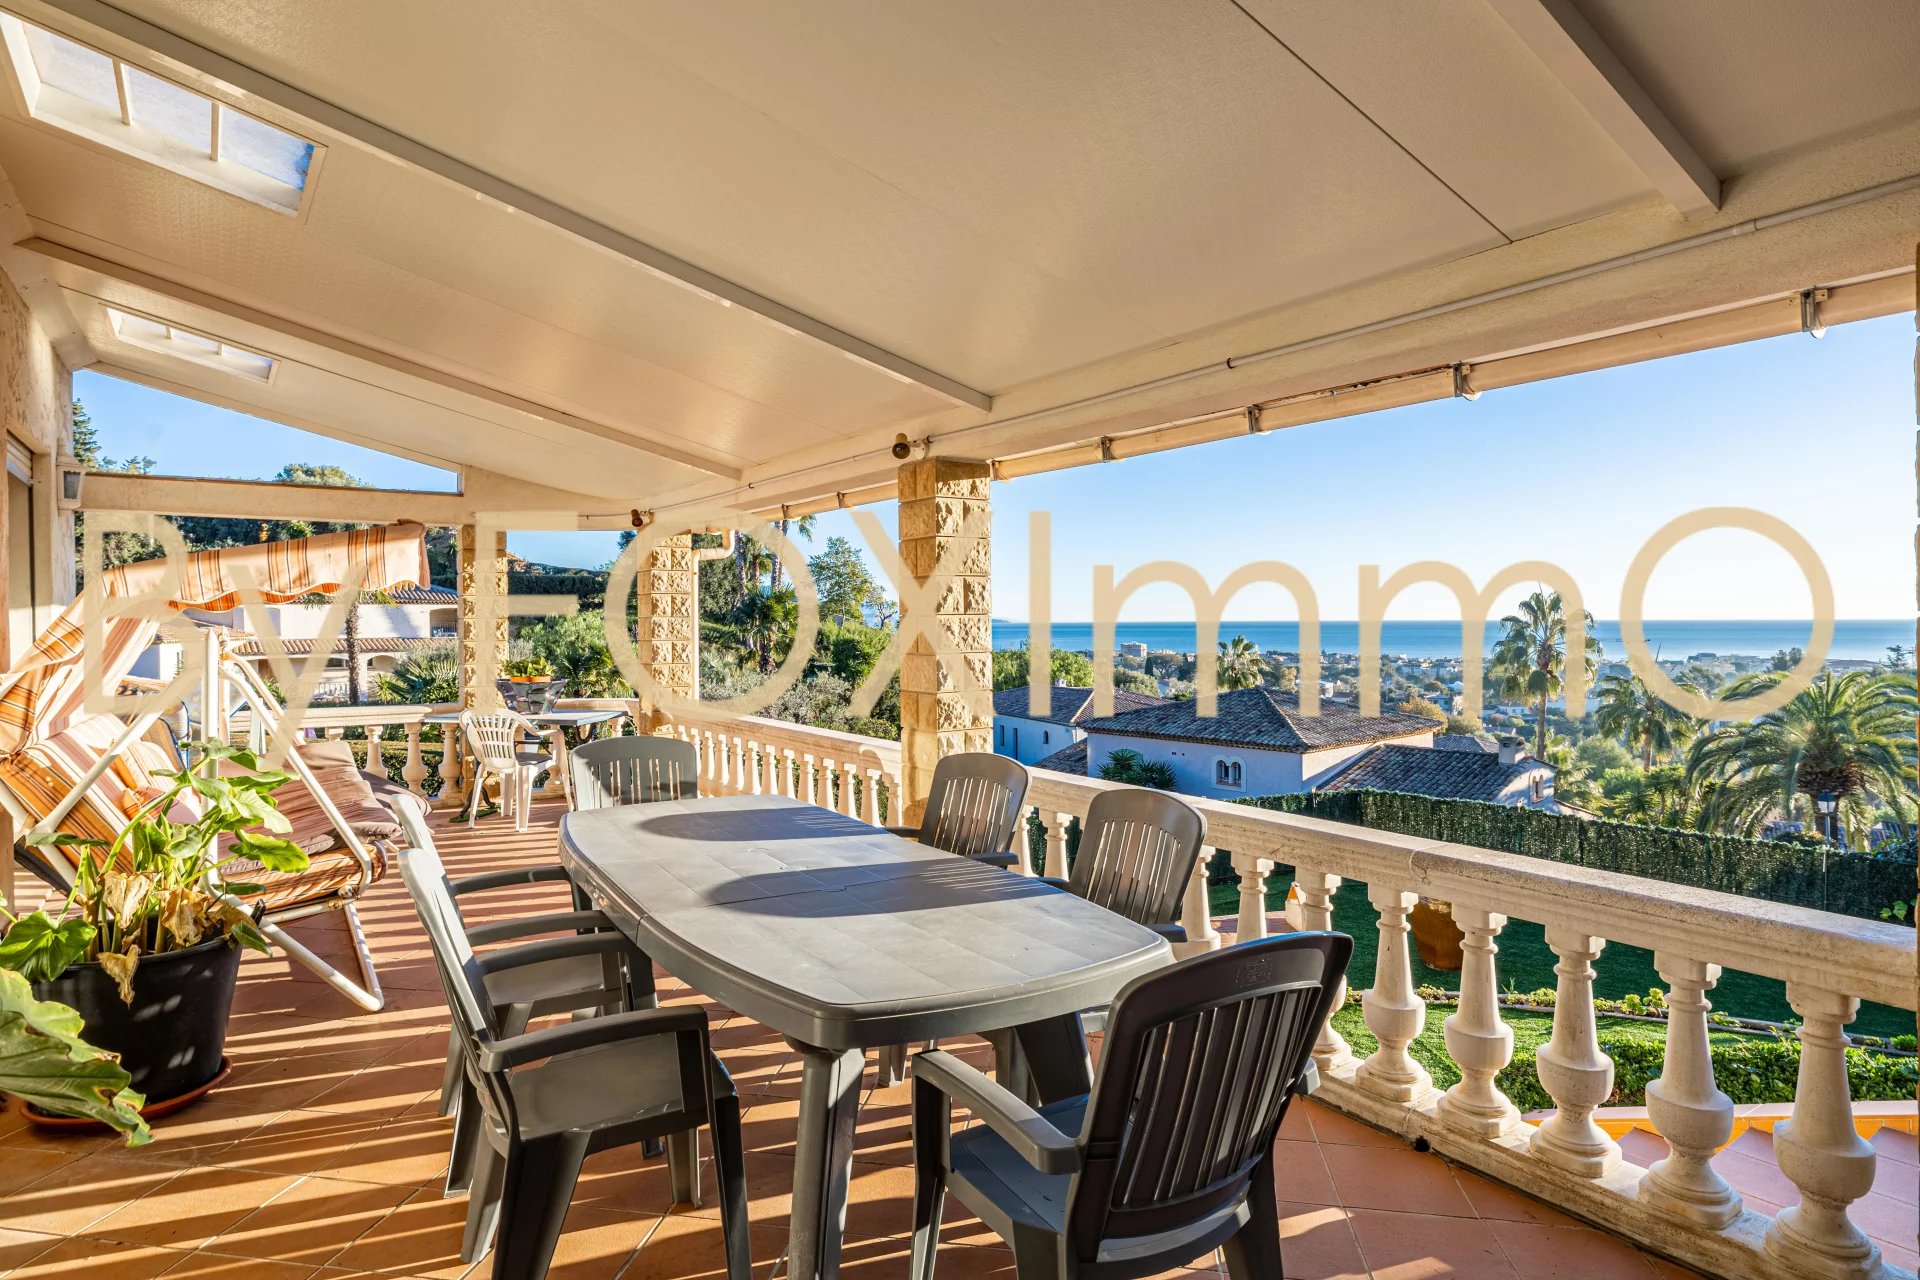 Ideally located in Antibes, this splendid villa offers a panoramic view of the sea. With 6 rooms